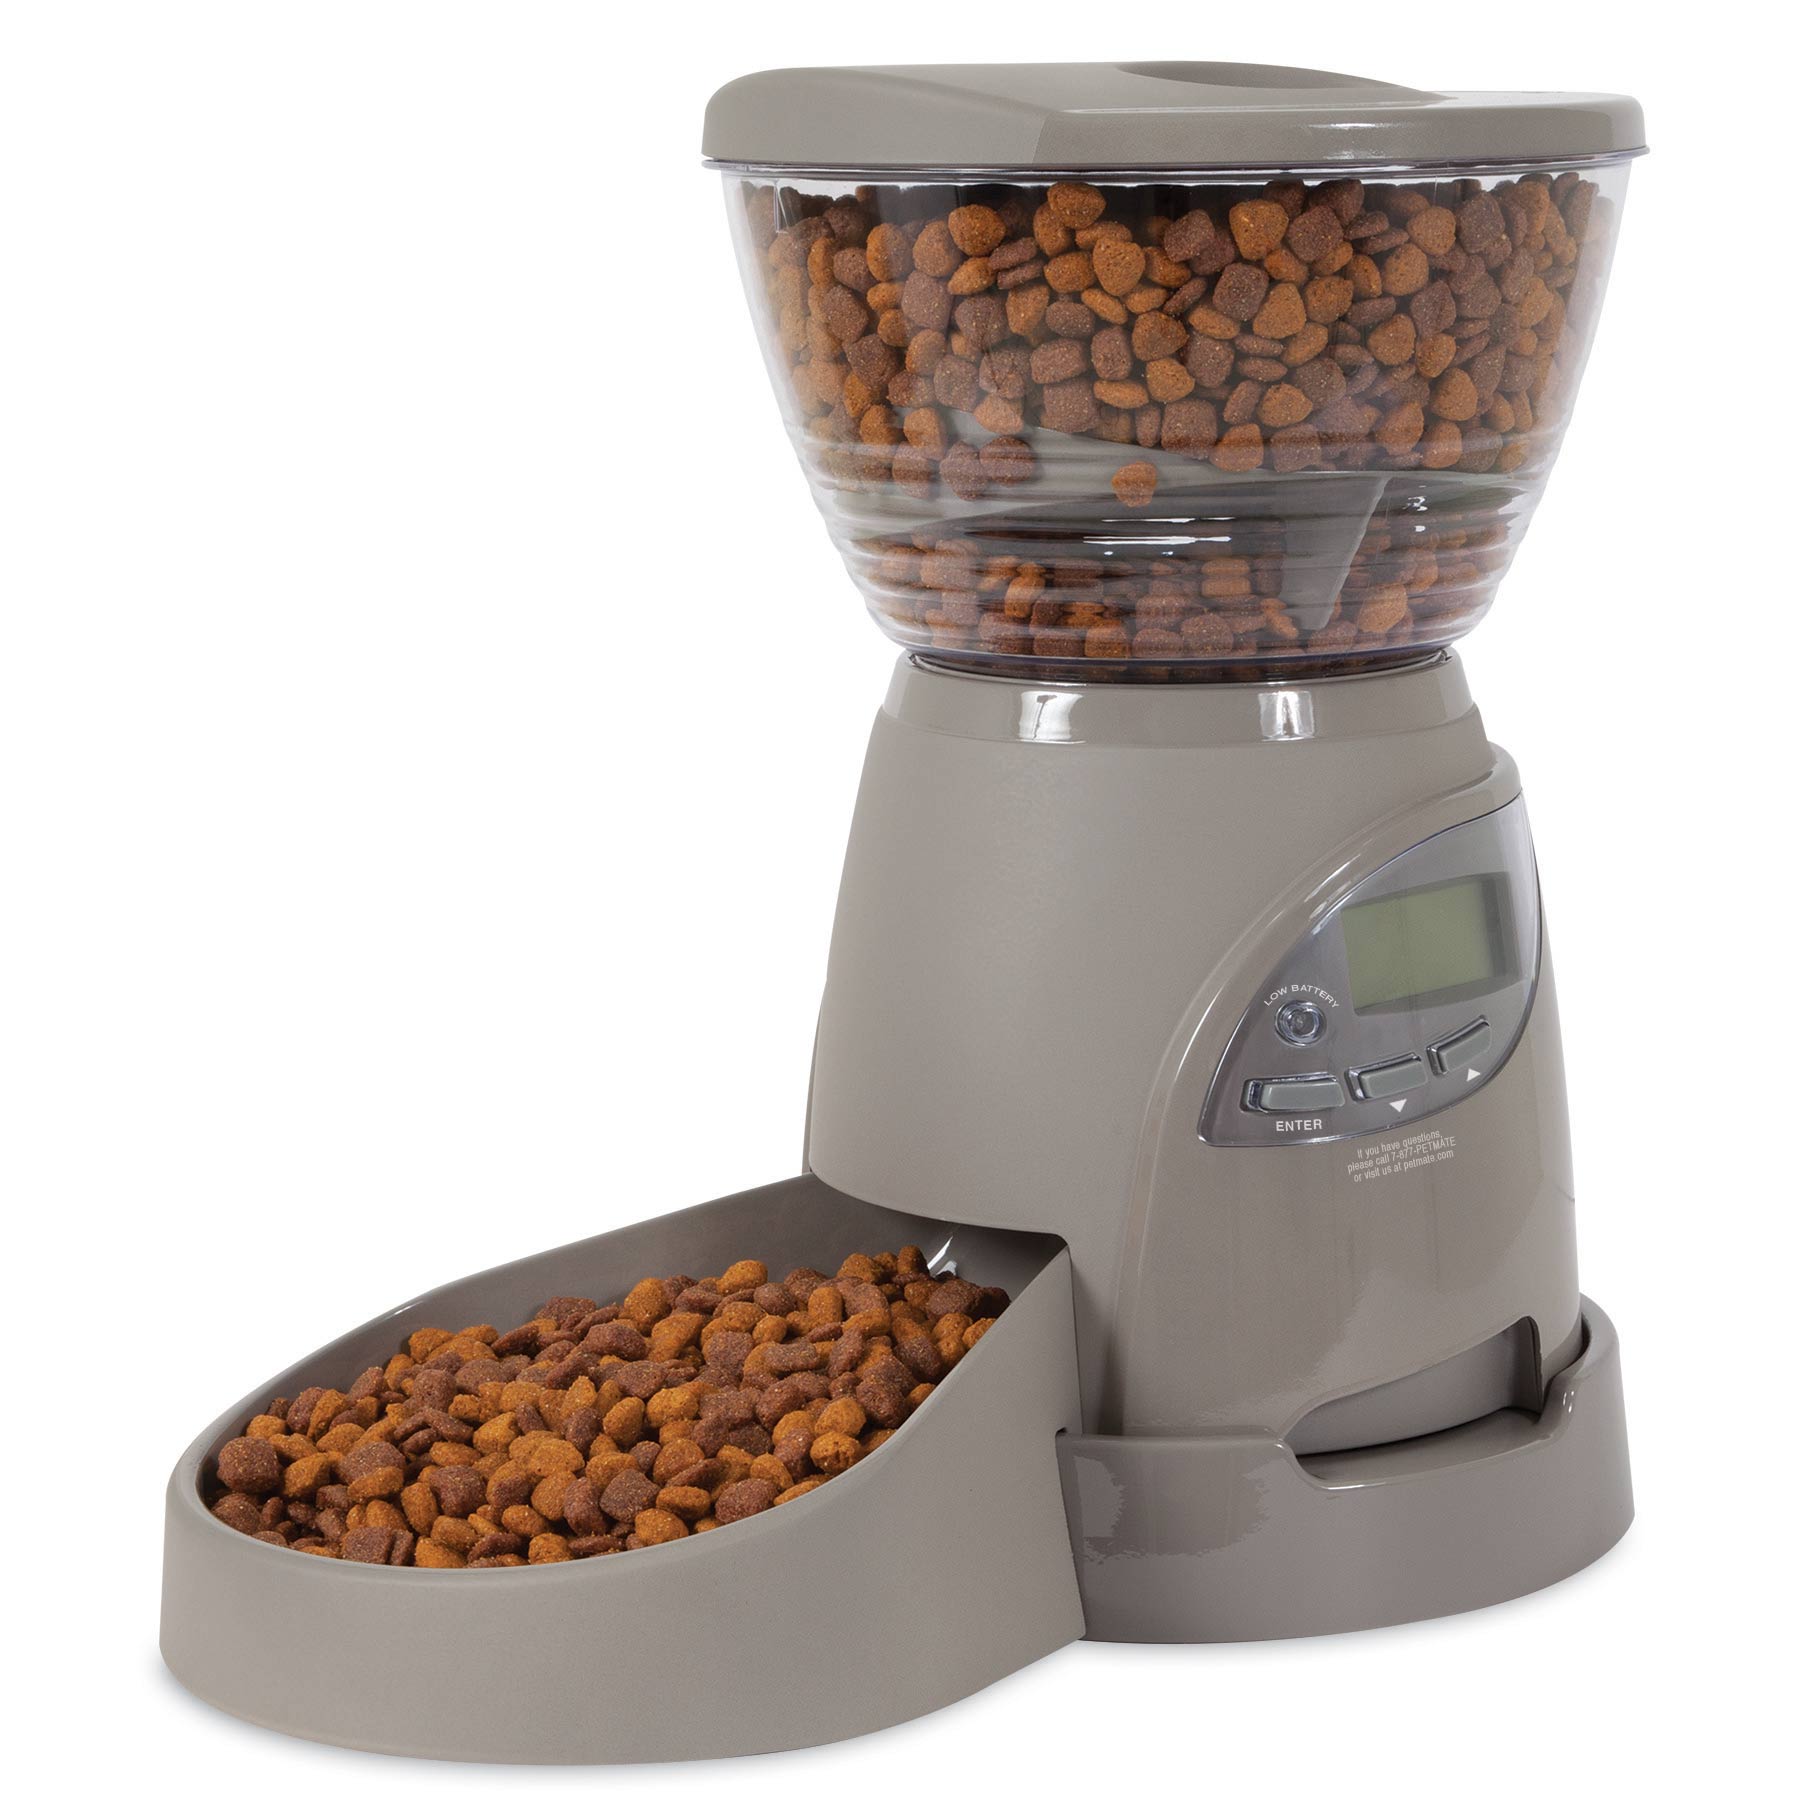 Petmate Portion Right Programmable Food Dispenser